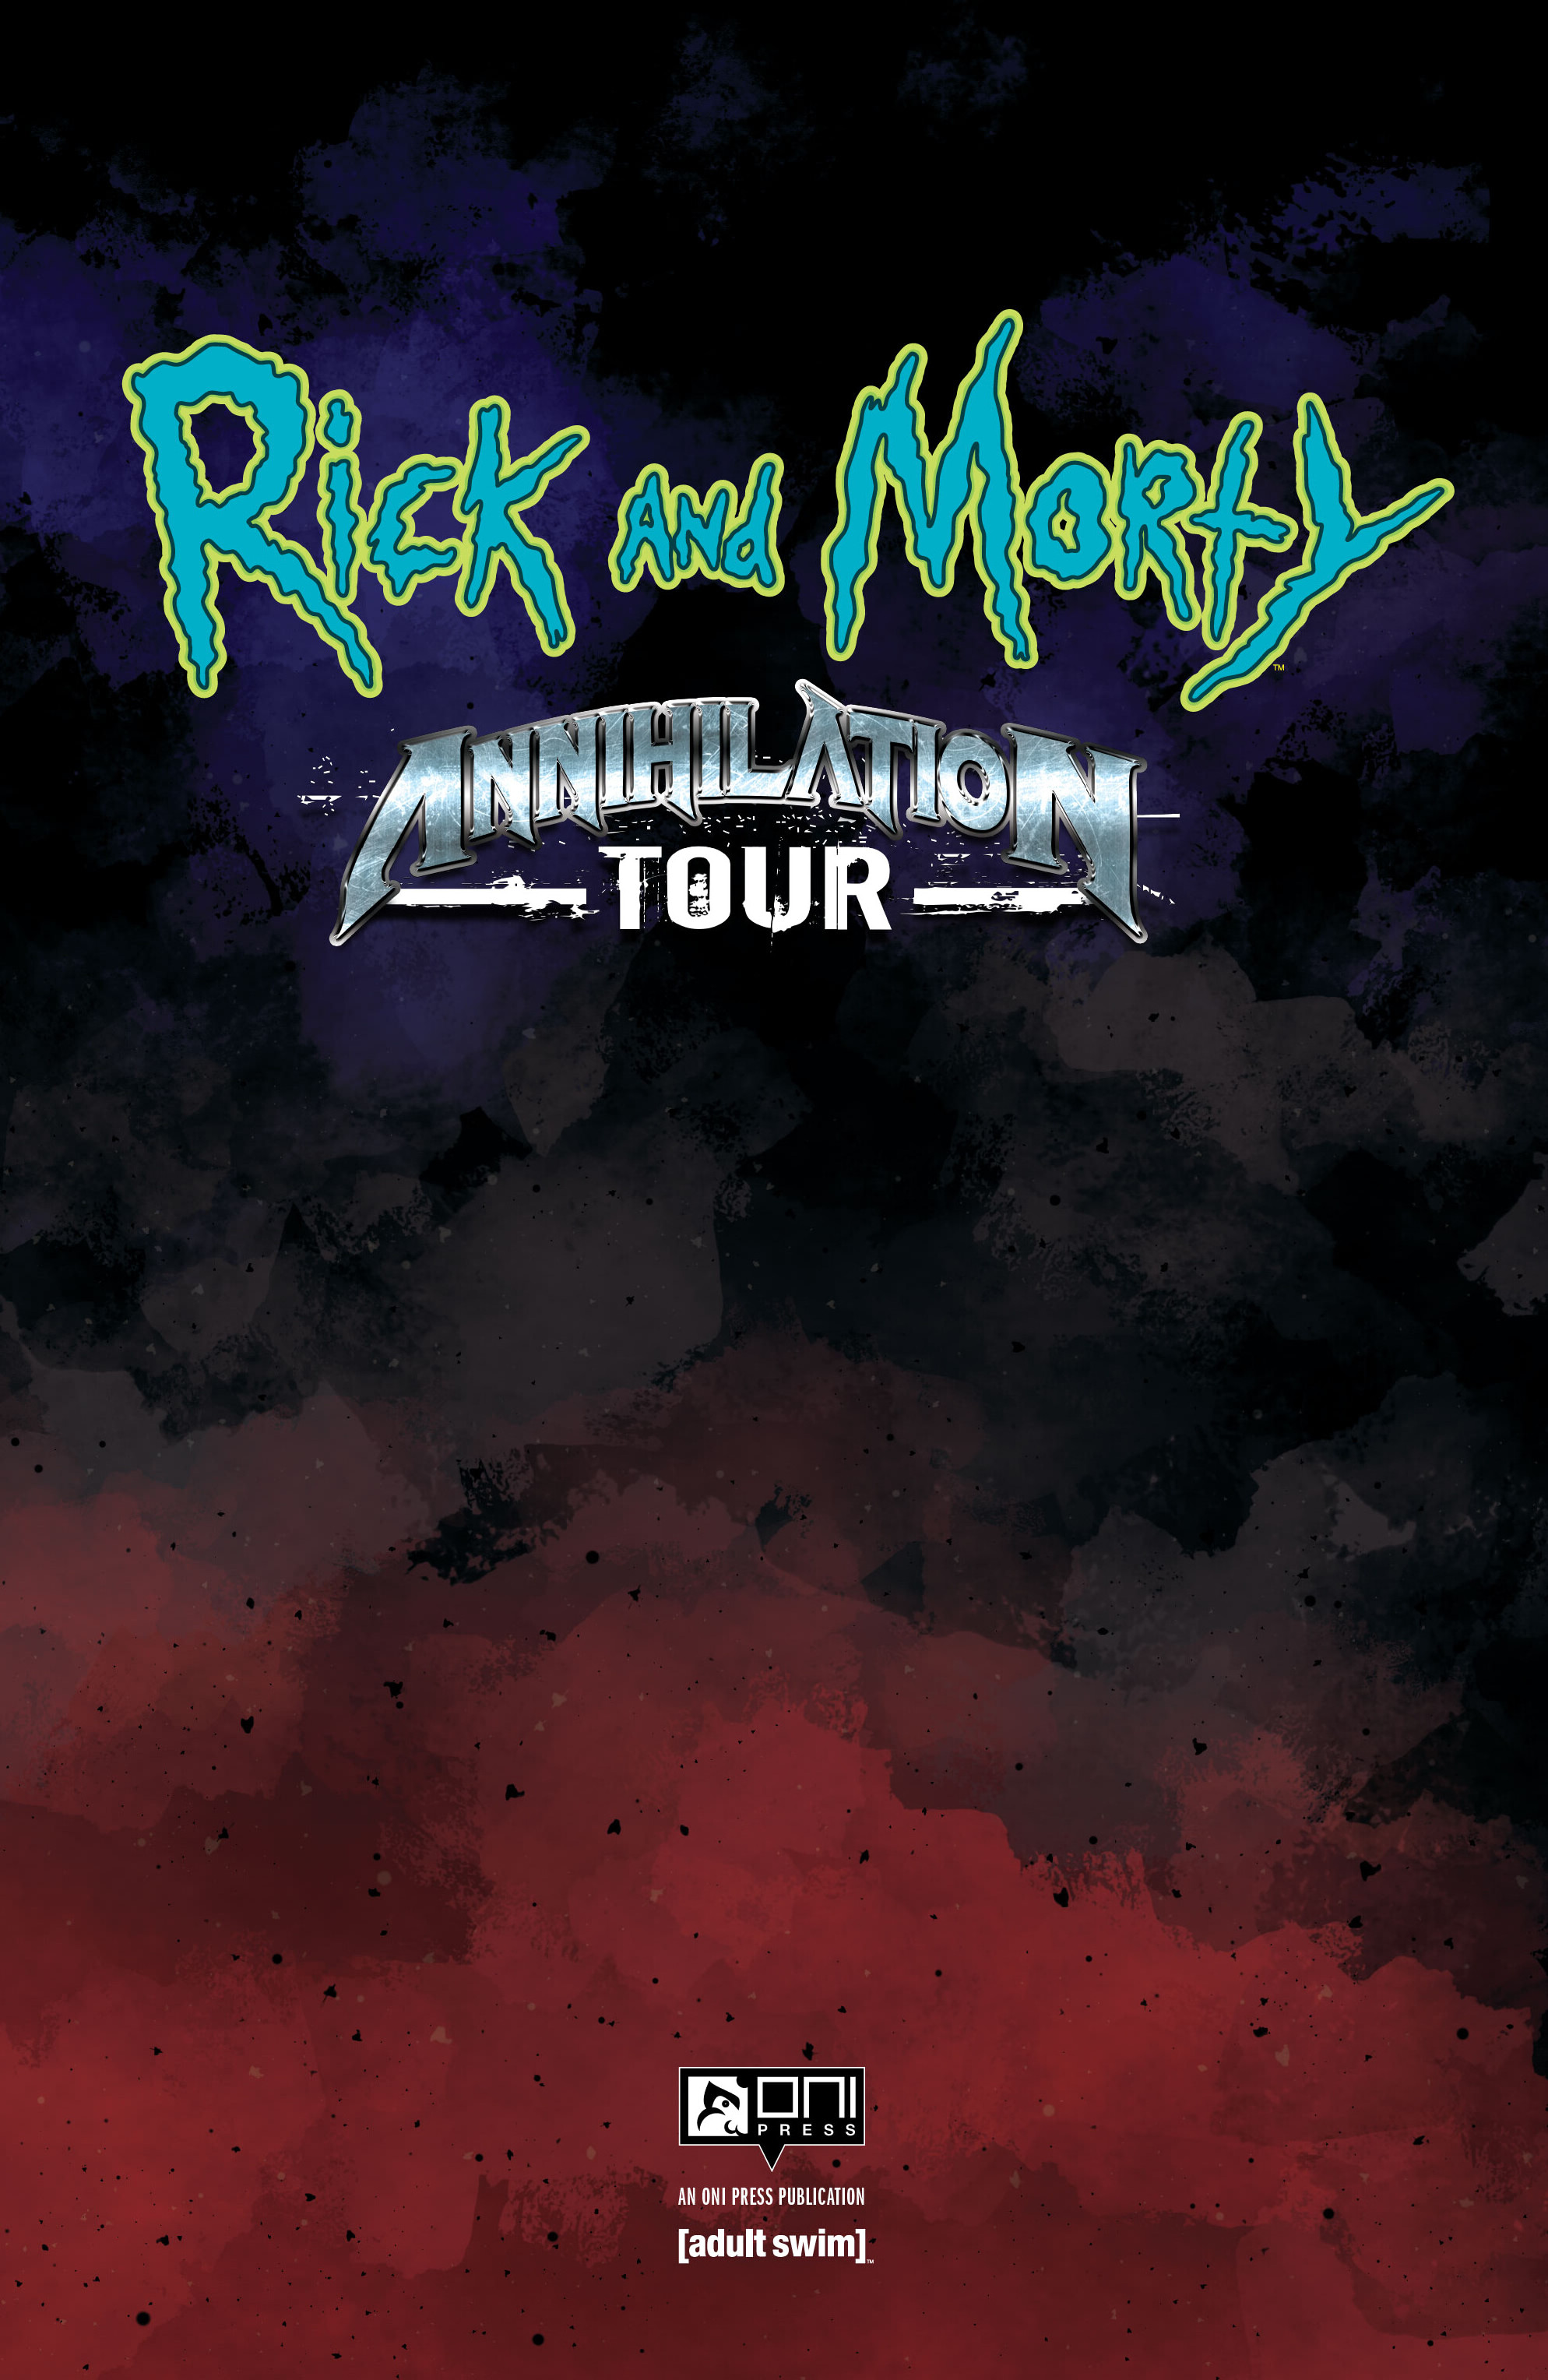 Read online Rick and Morty: Annihilation Tour comic -  Issue # TPB - 2